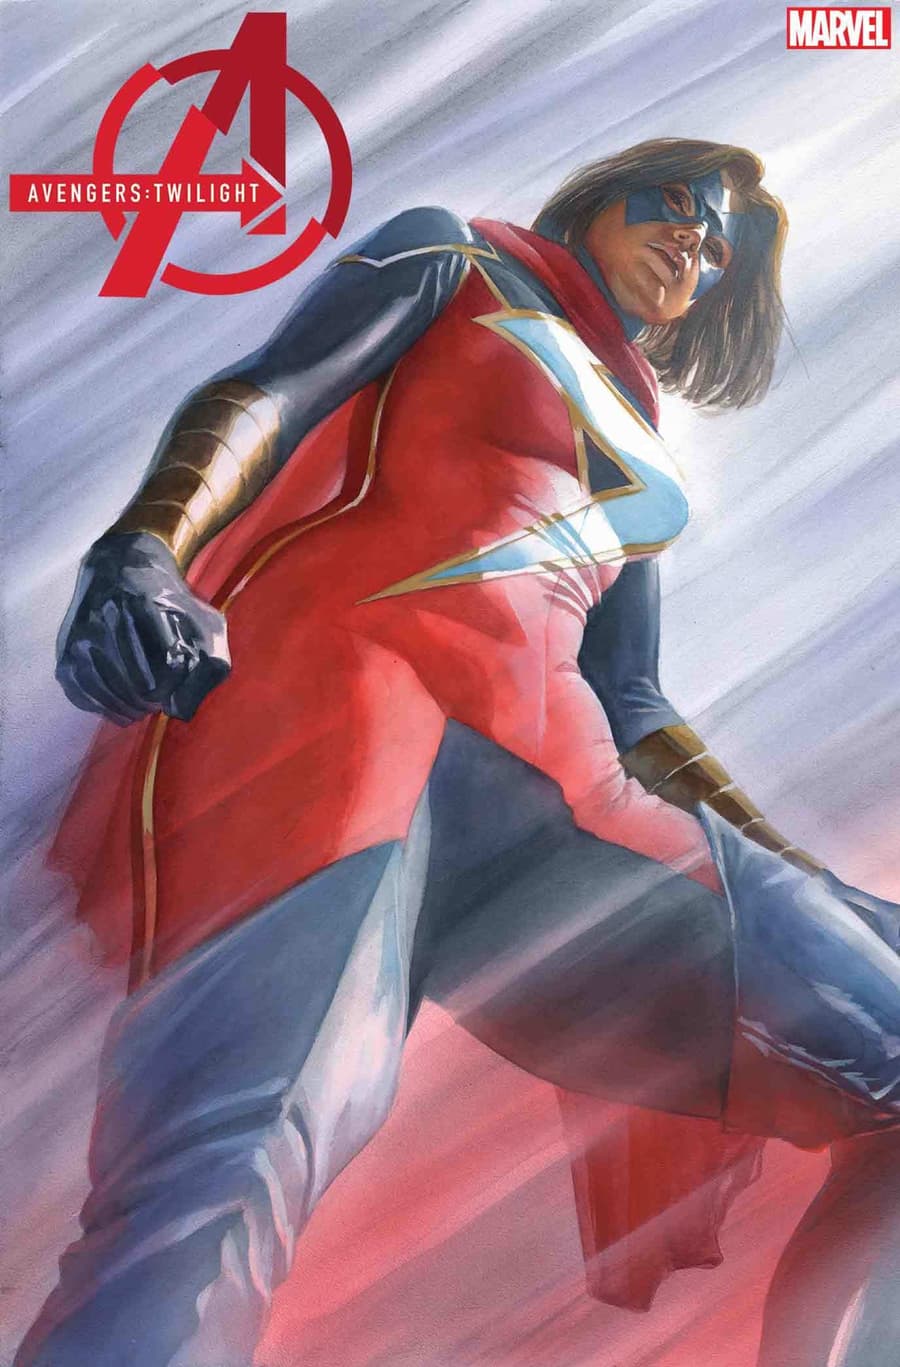 AVENGERS: TWILIGHT #3 cover by Alex Ross